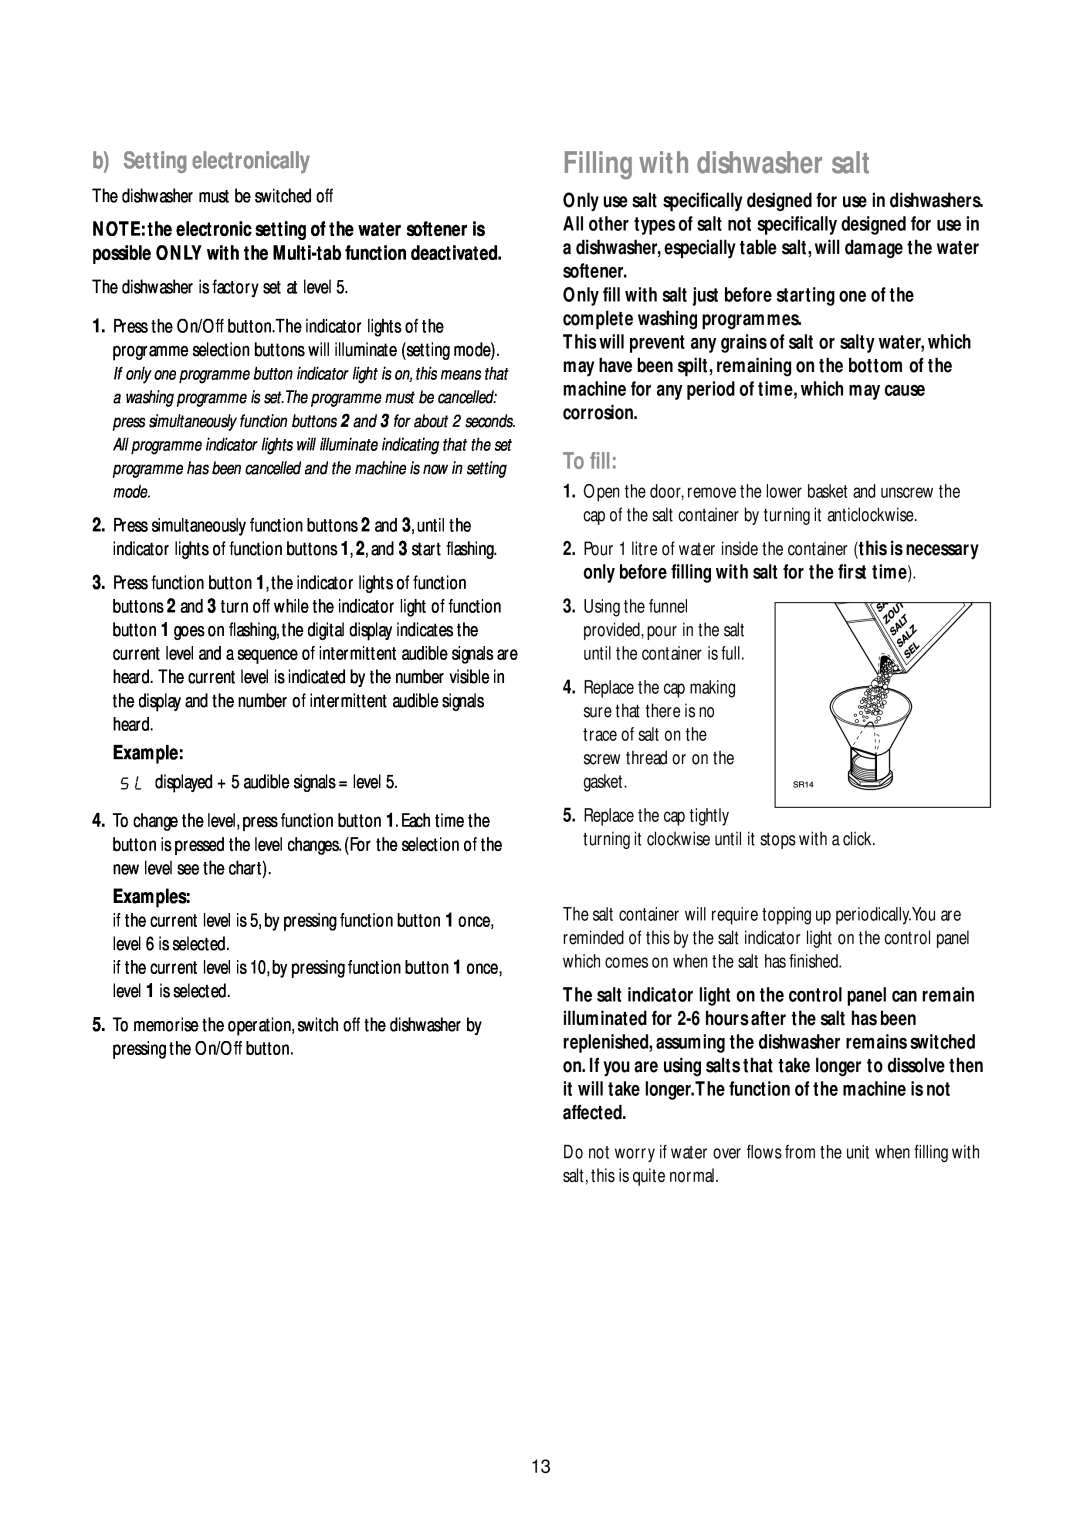 John Lewis JLBIDW 901 instruction manual Filling with dishwasher salt, b Setting electronically, To fill, Examples 